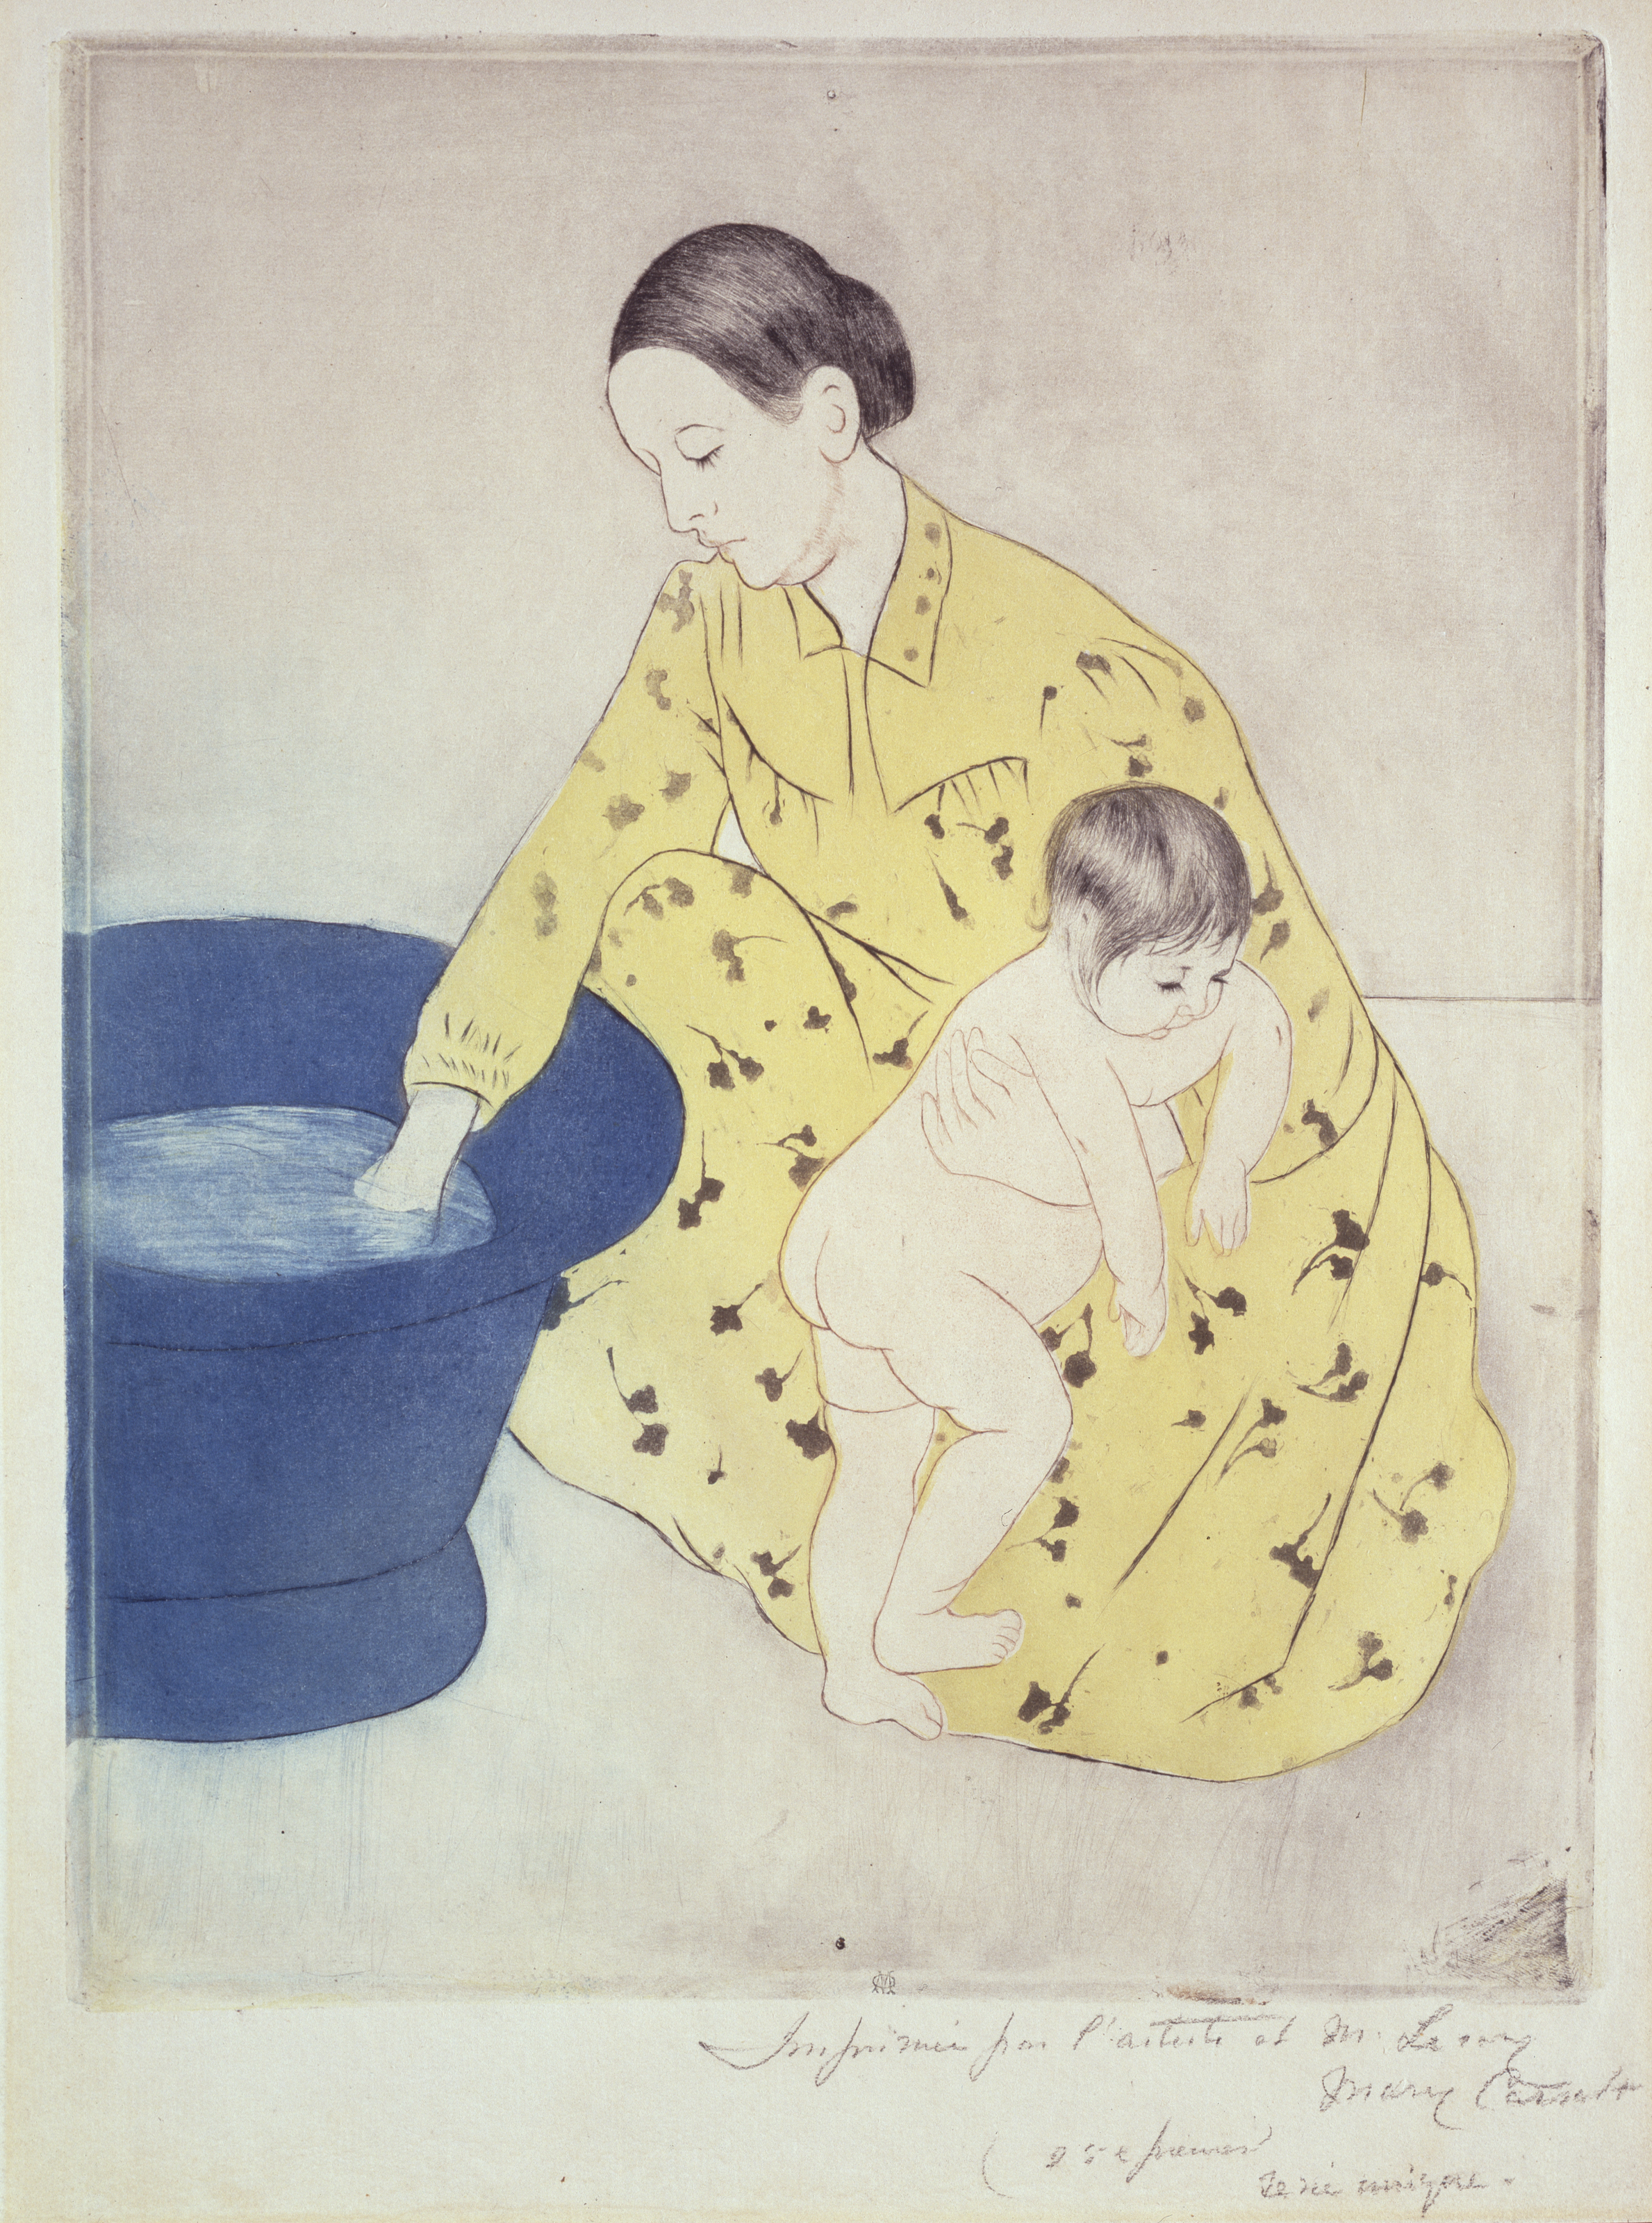 The Bath by Mary Cassatt - 1891/1891 - 9.625 x 12.375 in National Museum of Women in the Arts